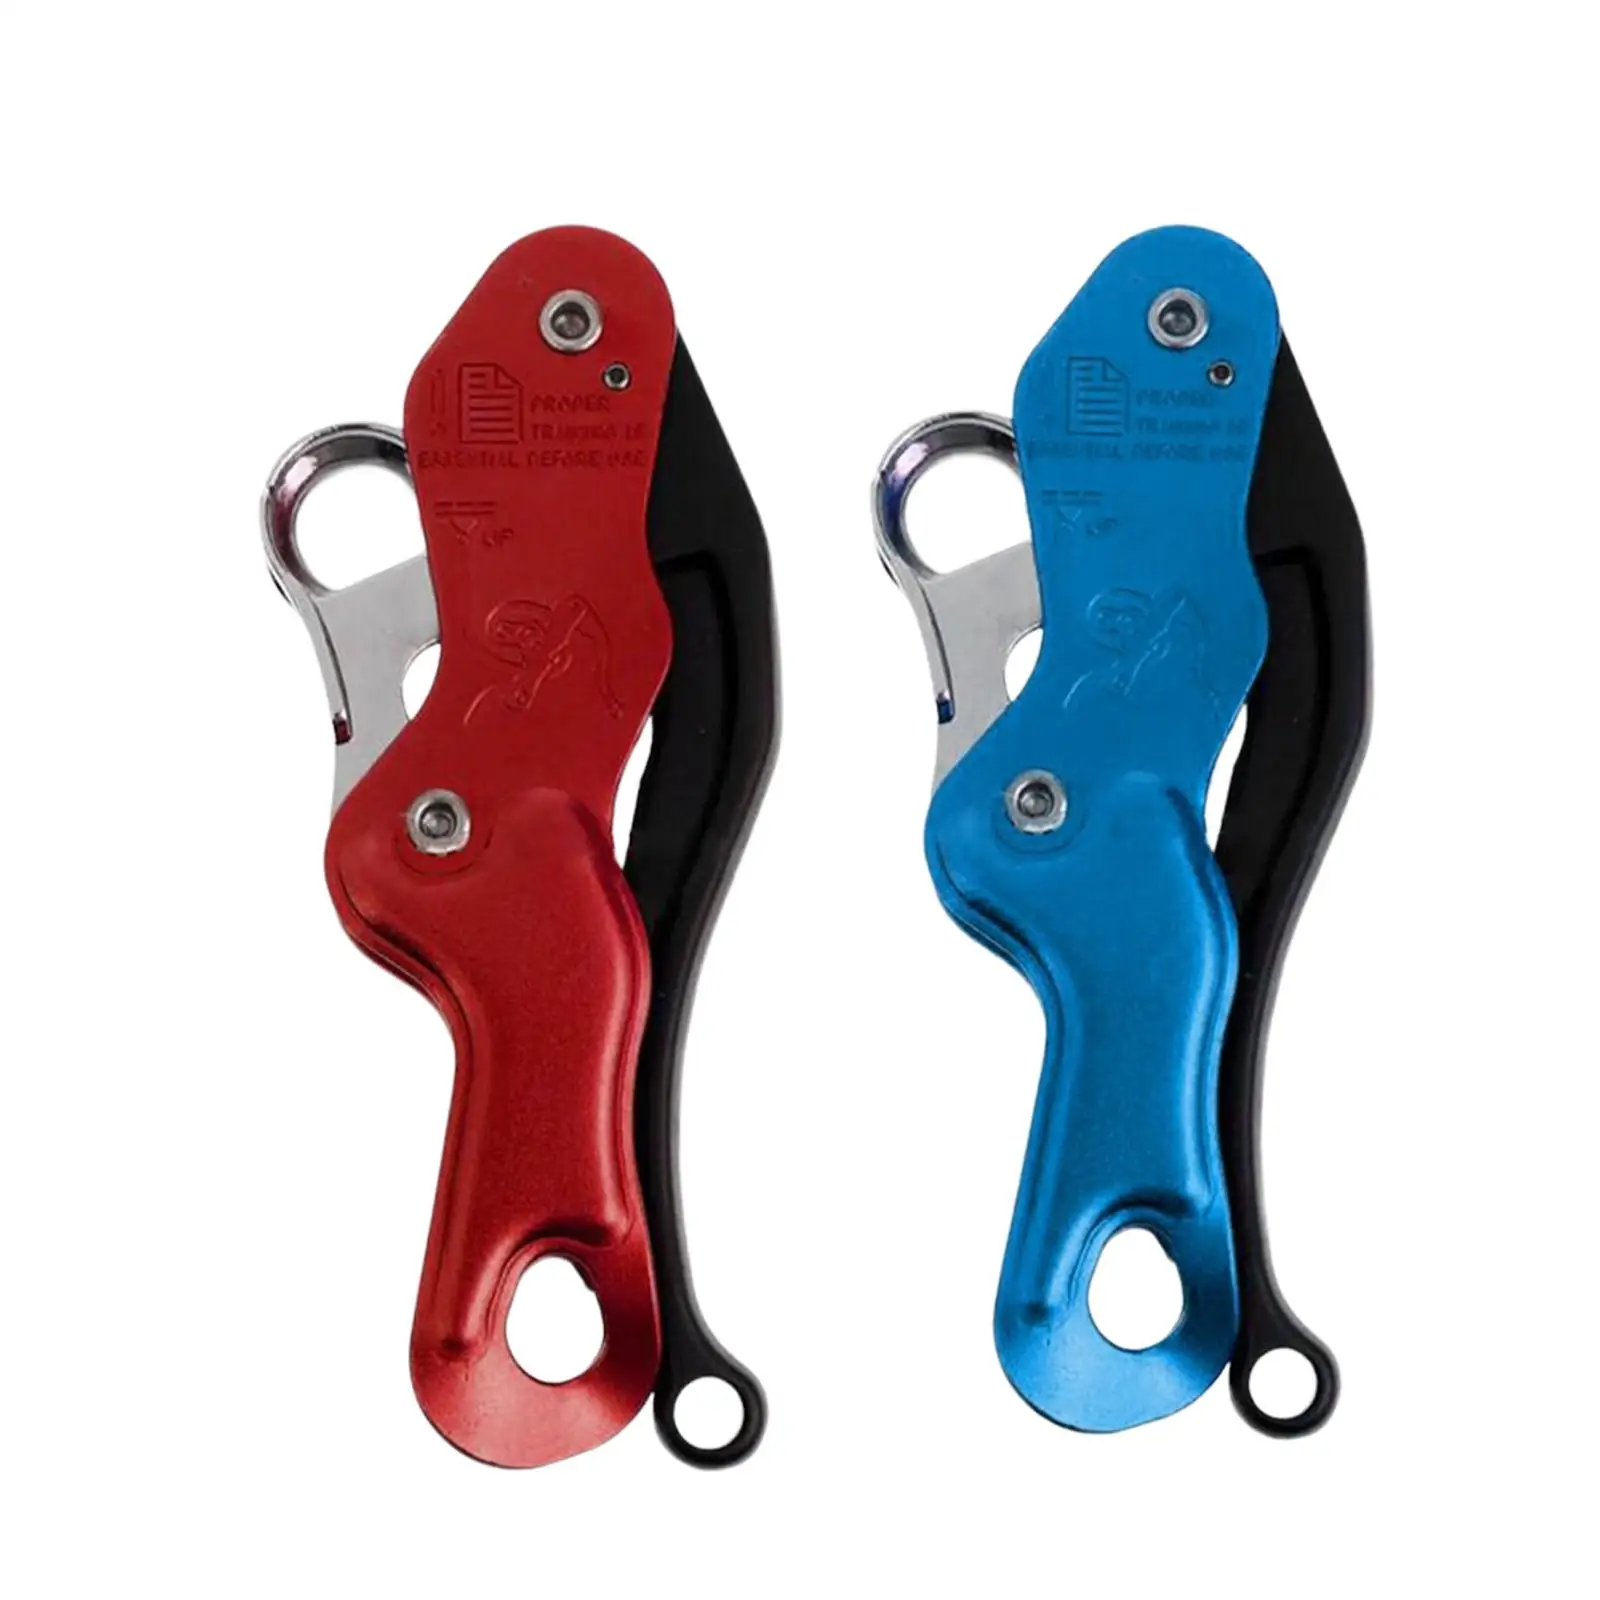 

Stop Descender, Self Locking Self Braking Belay Devices Rappelling Gear High Strength Hand Operated for Outdoor Climbing